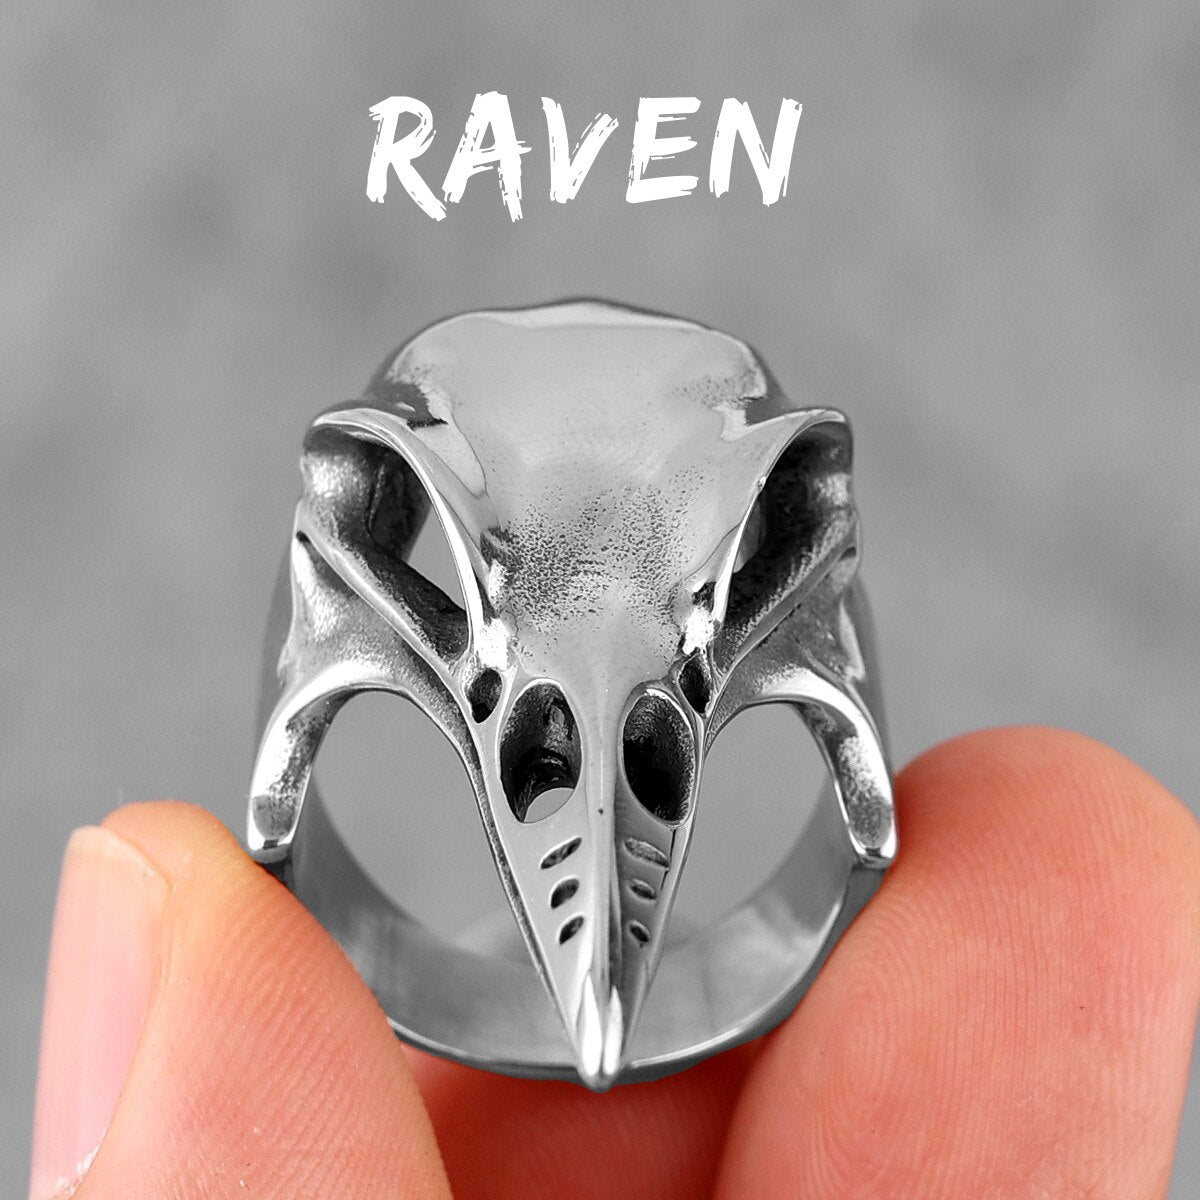 Viking Crow Skull Stainless Steel Mens Rings Punk Amulet Gothic for Male Boyfriend Biker Jewelry Creativity Gift R705-Silver